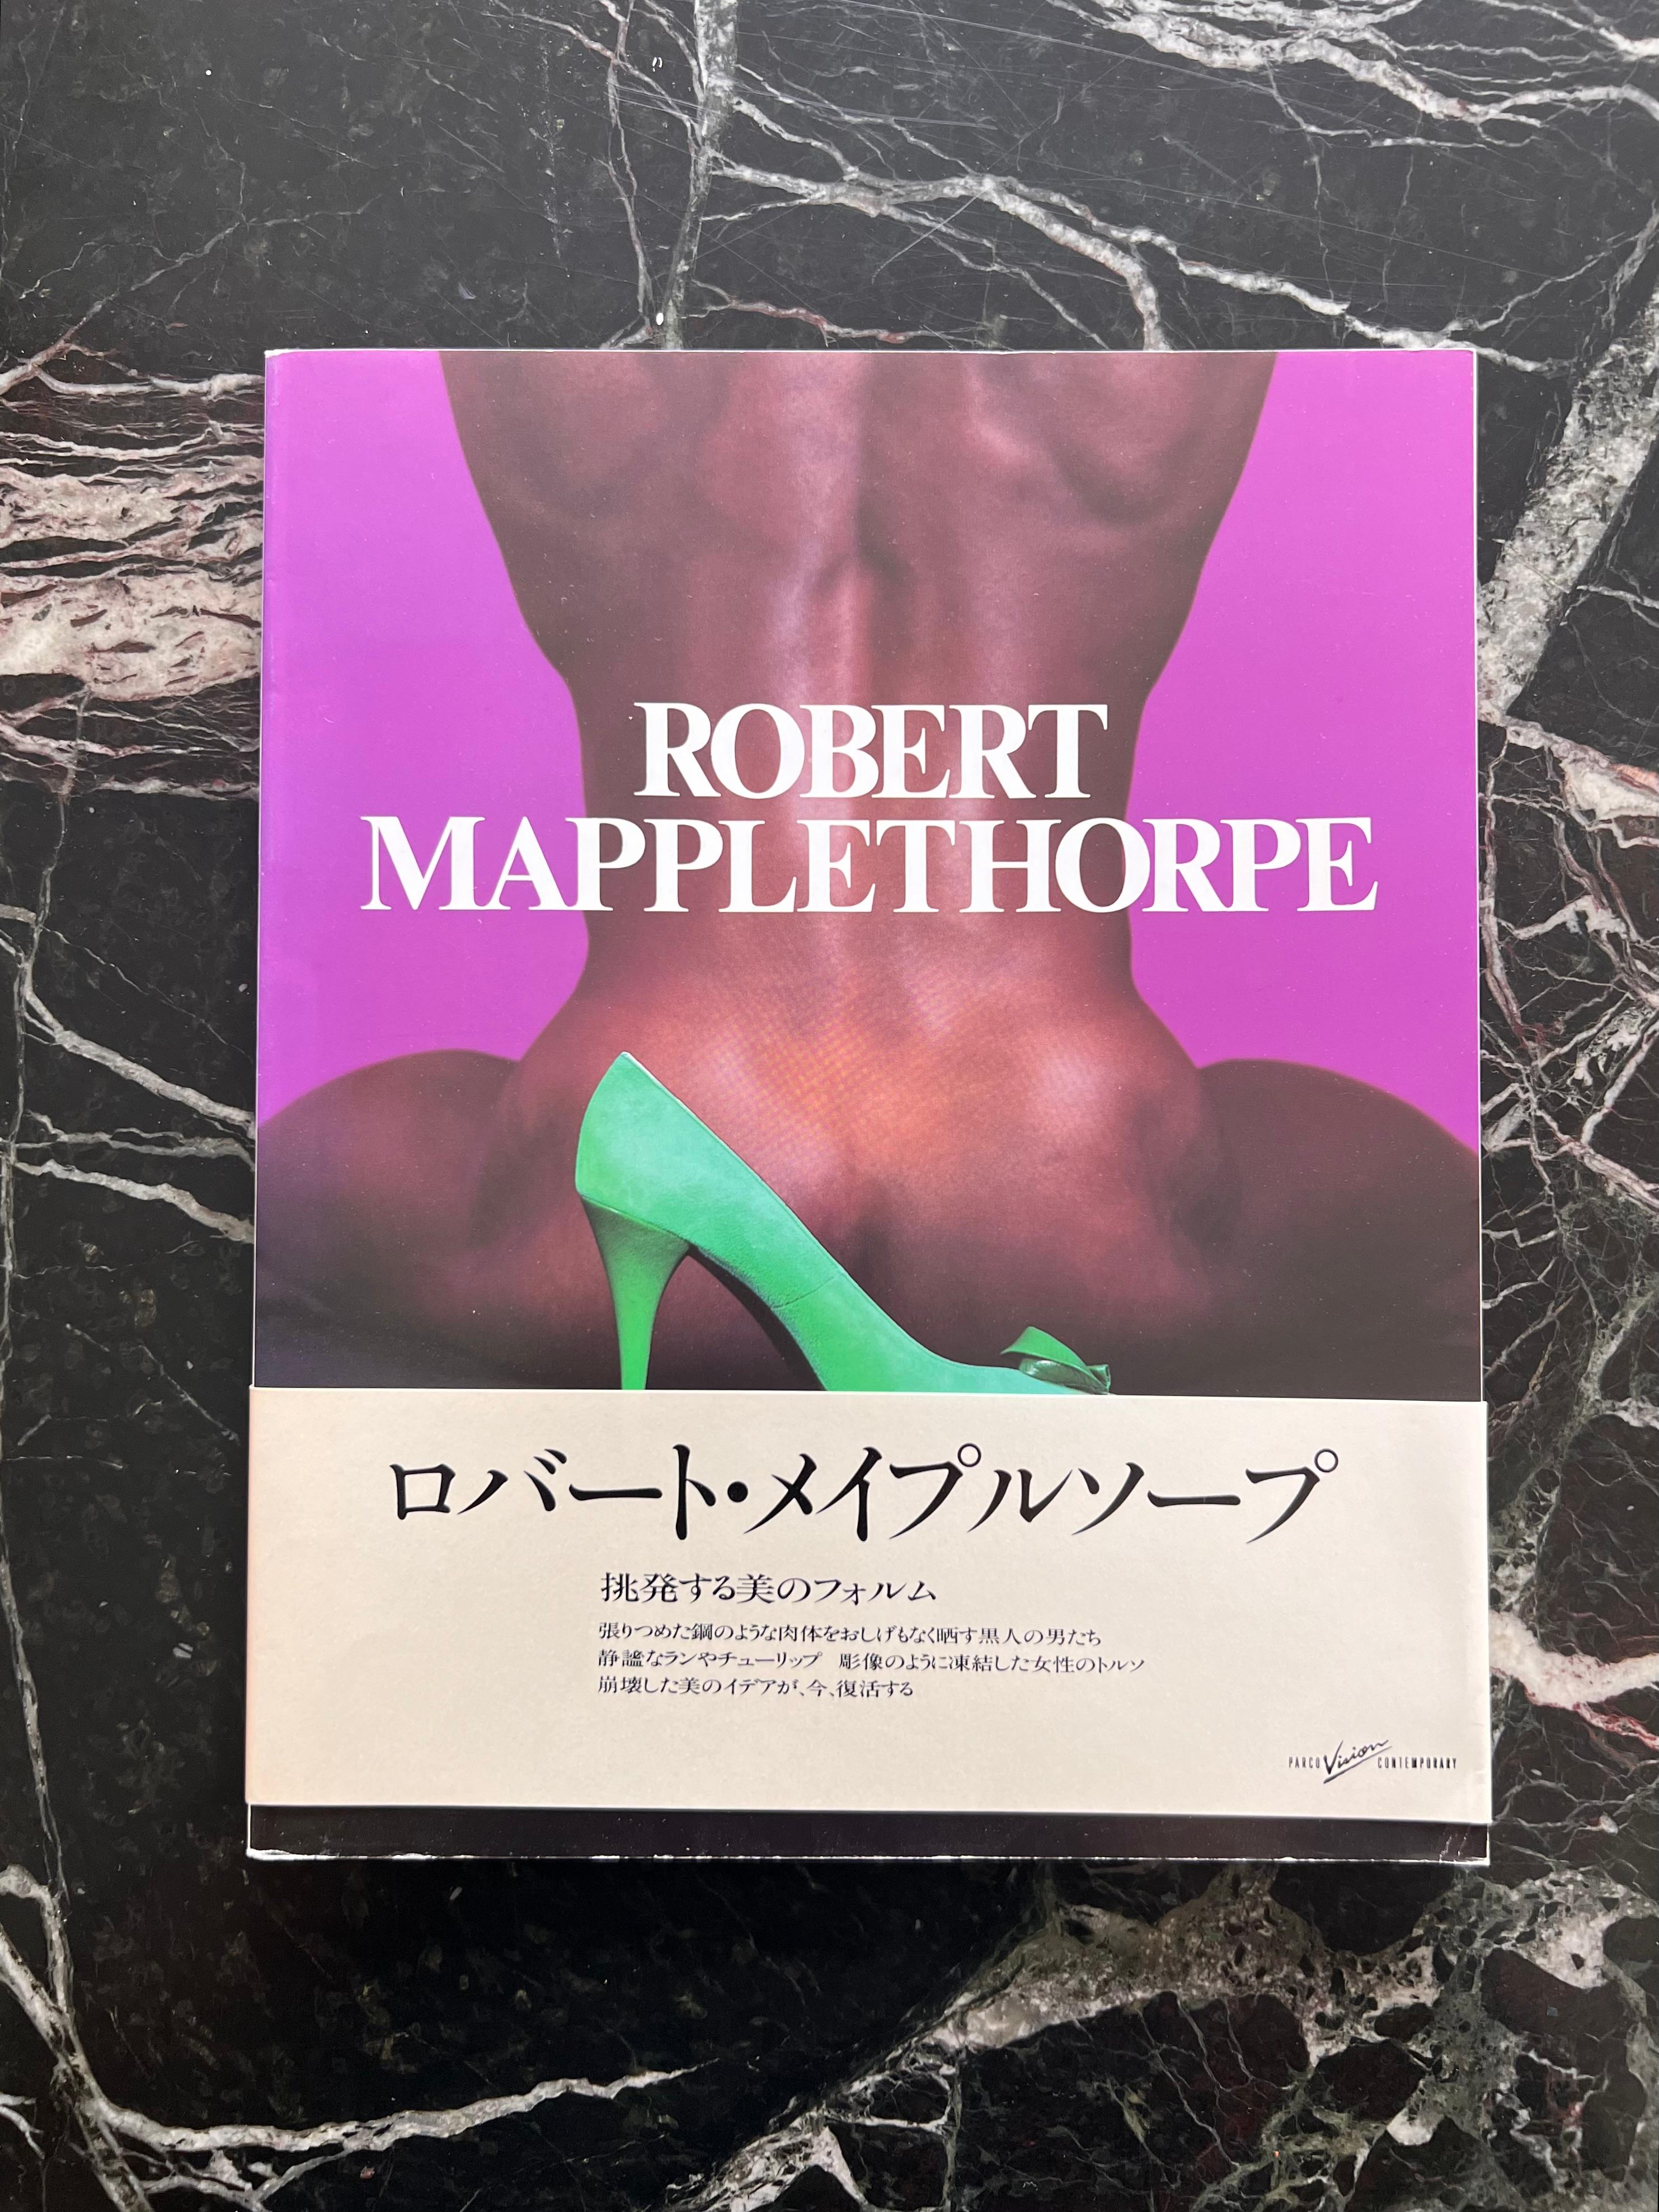 A rare vintage Robert Mapplethorpe coffee table book, Parco Vision Contemporary, softcover, 1987. Featuring text in Japanese and English and both color and black and white plates, including portraits of Patti Smith, Sam Wagstaff, and myriad